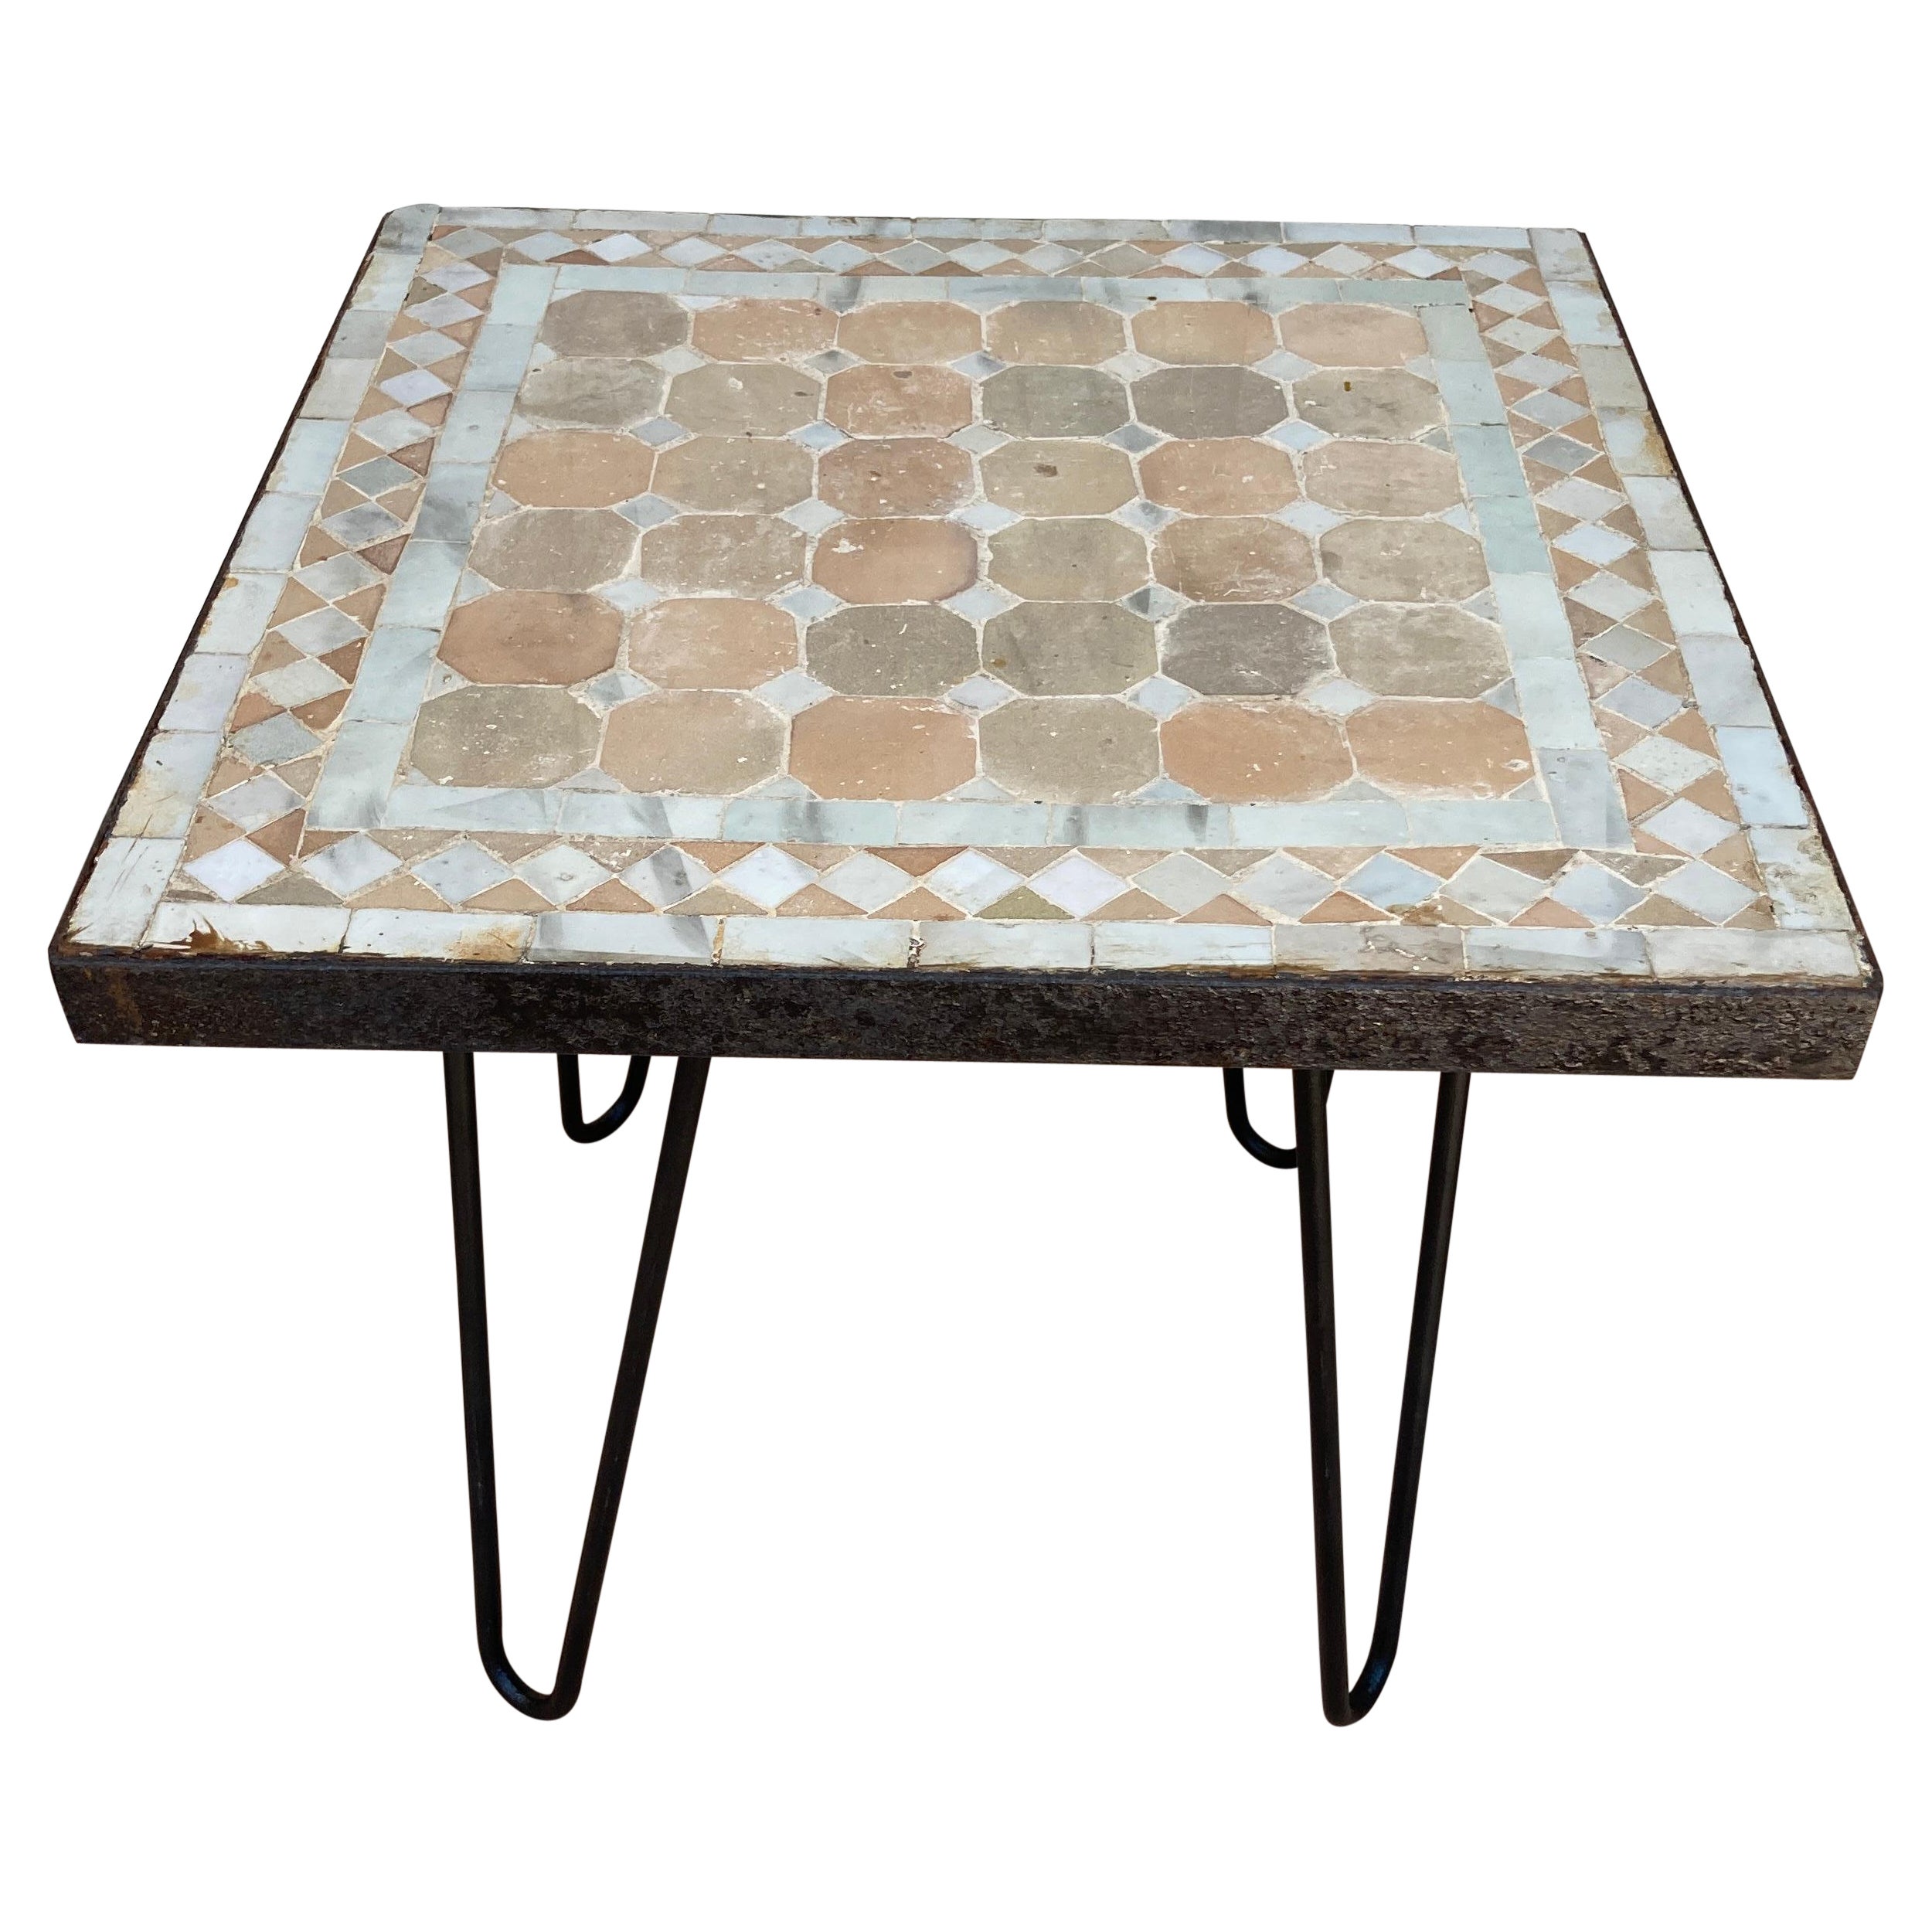 Moroccan Mosaic Tile Square Tile Side Table